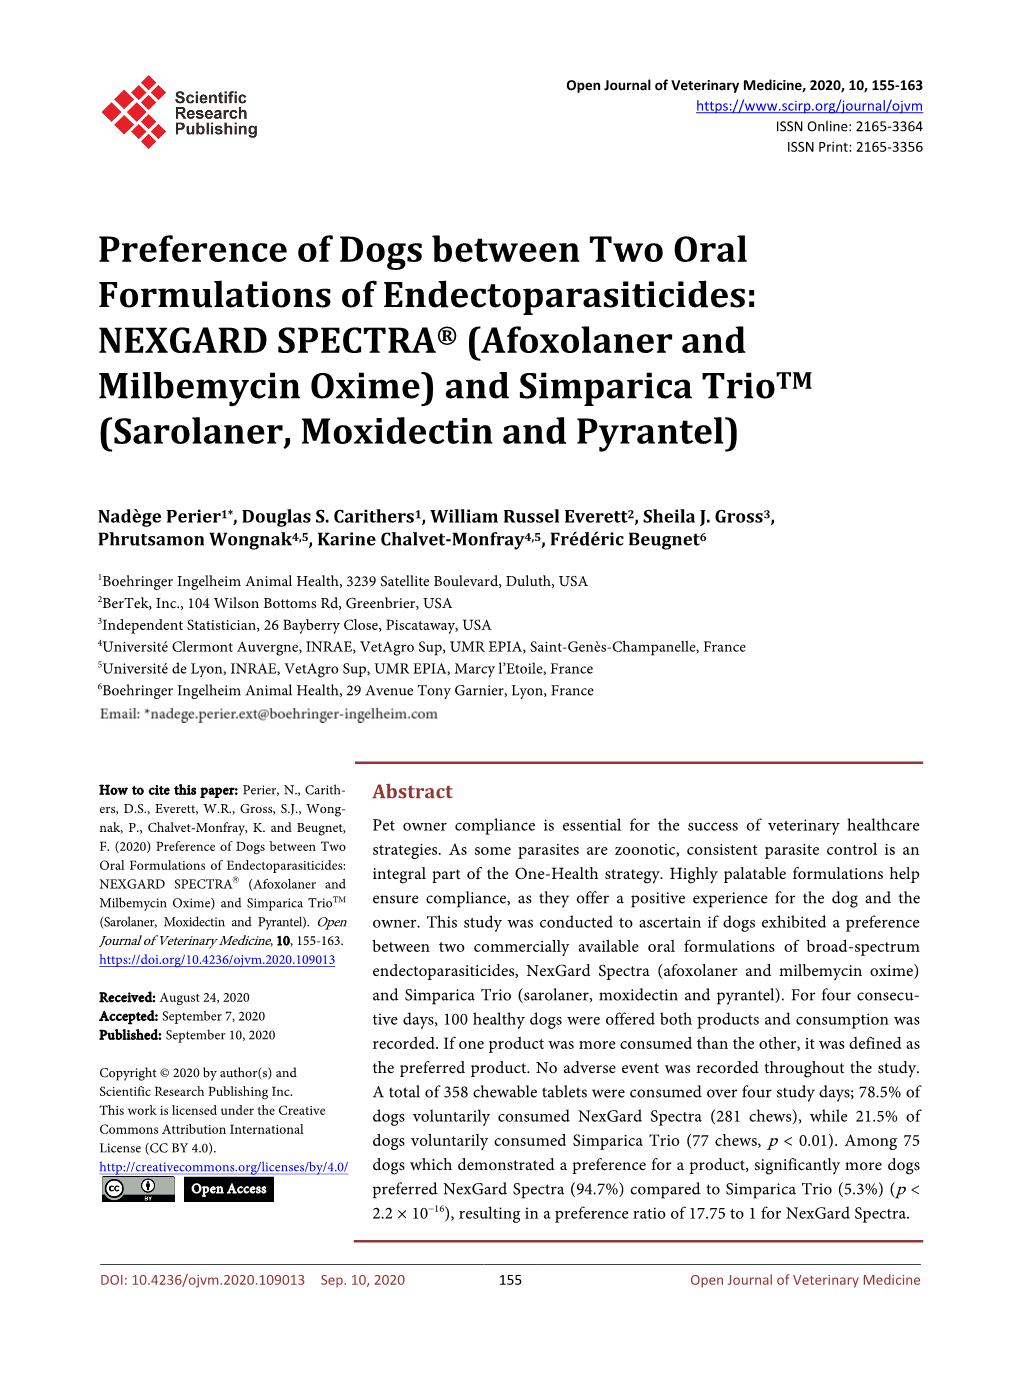 Preference of Dogs Between Two Oral Formulations Of